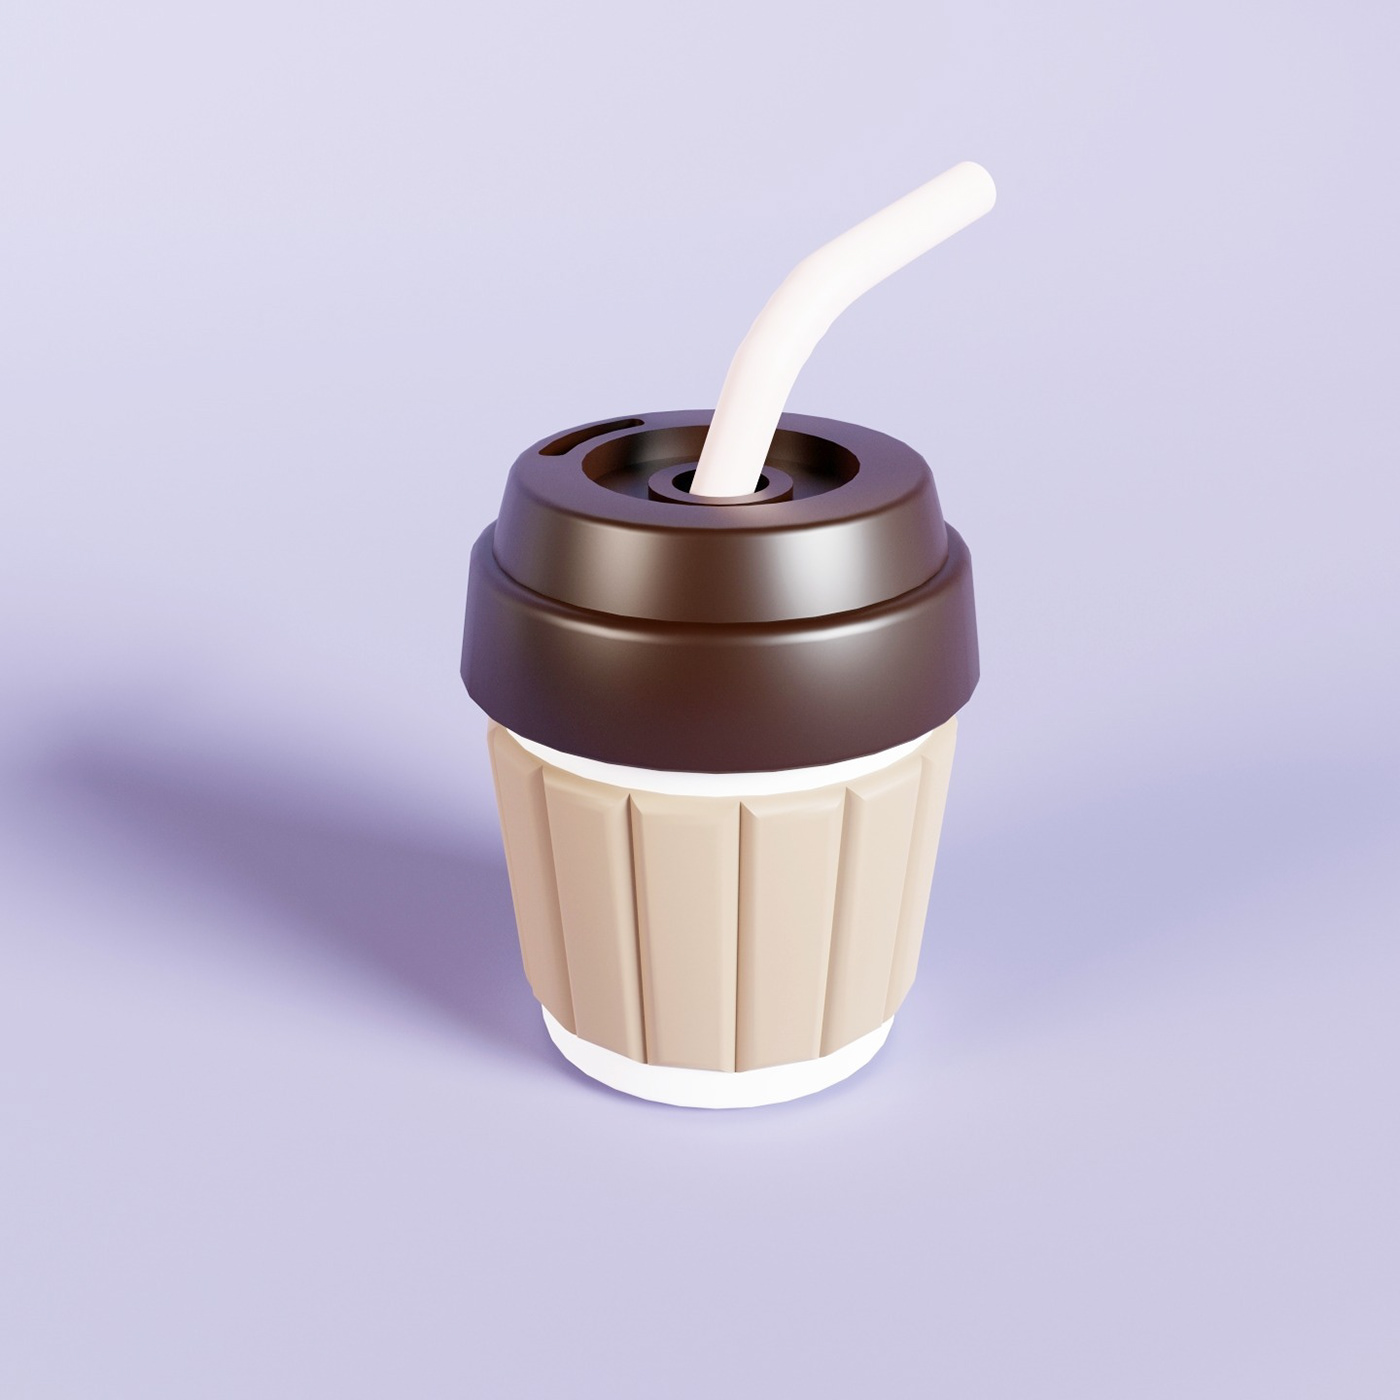 In this 3D cute-style image, a delightful coffee mug steals the spotlight.